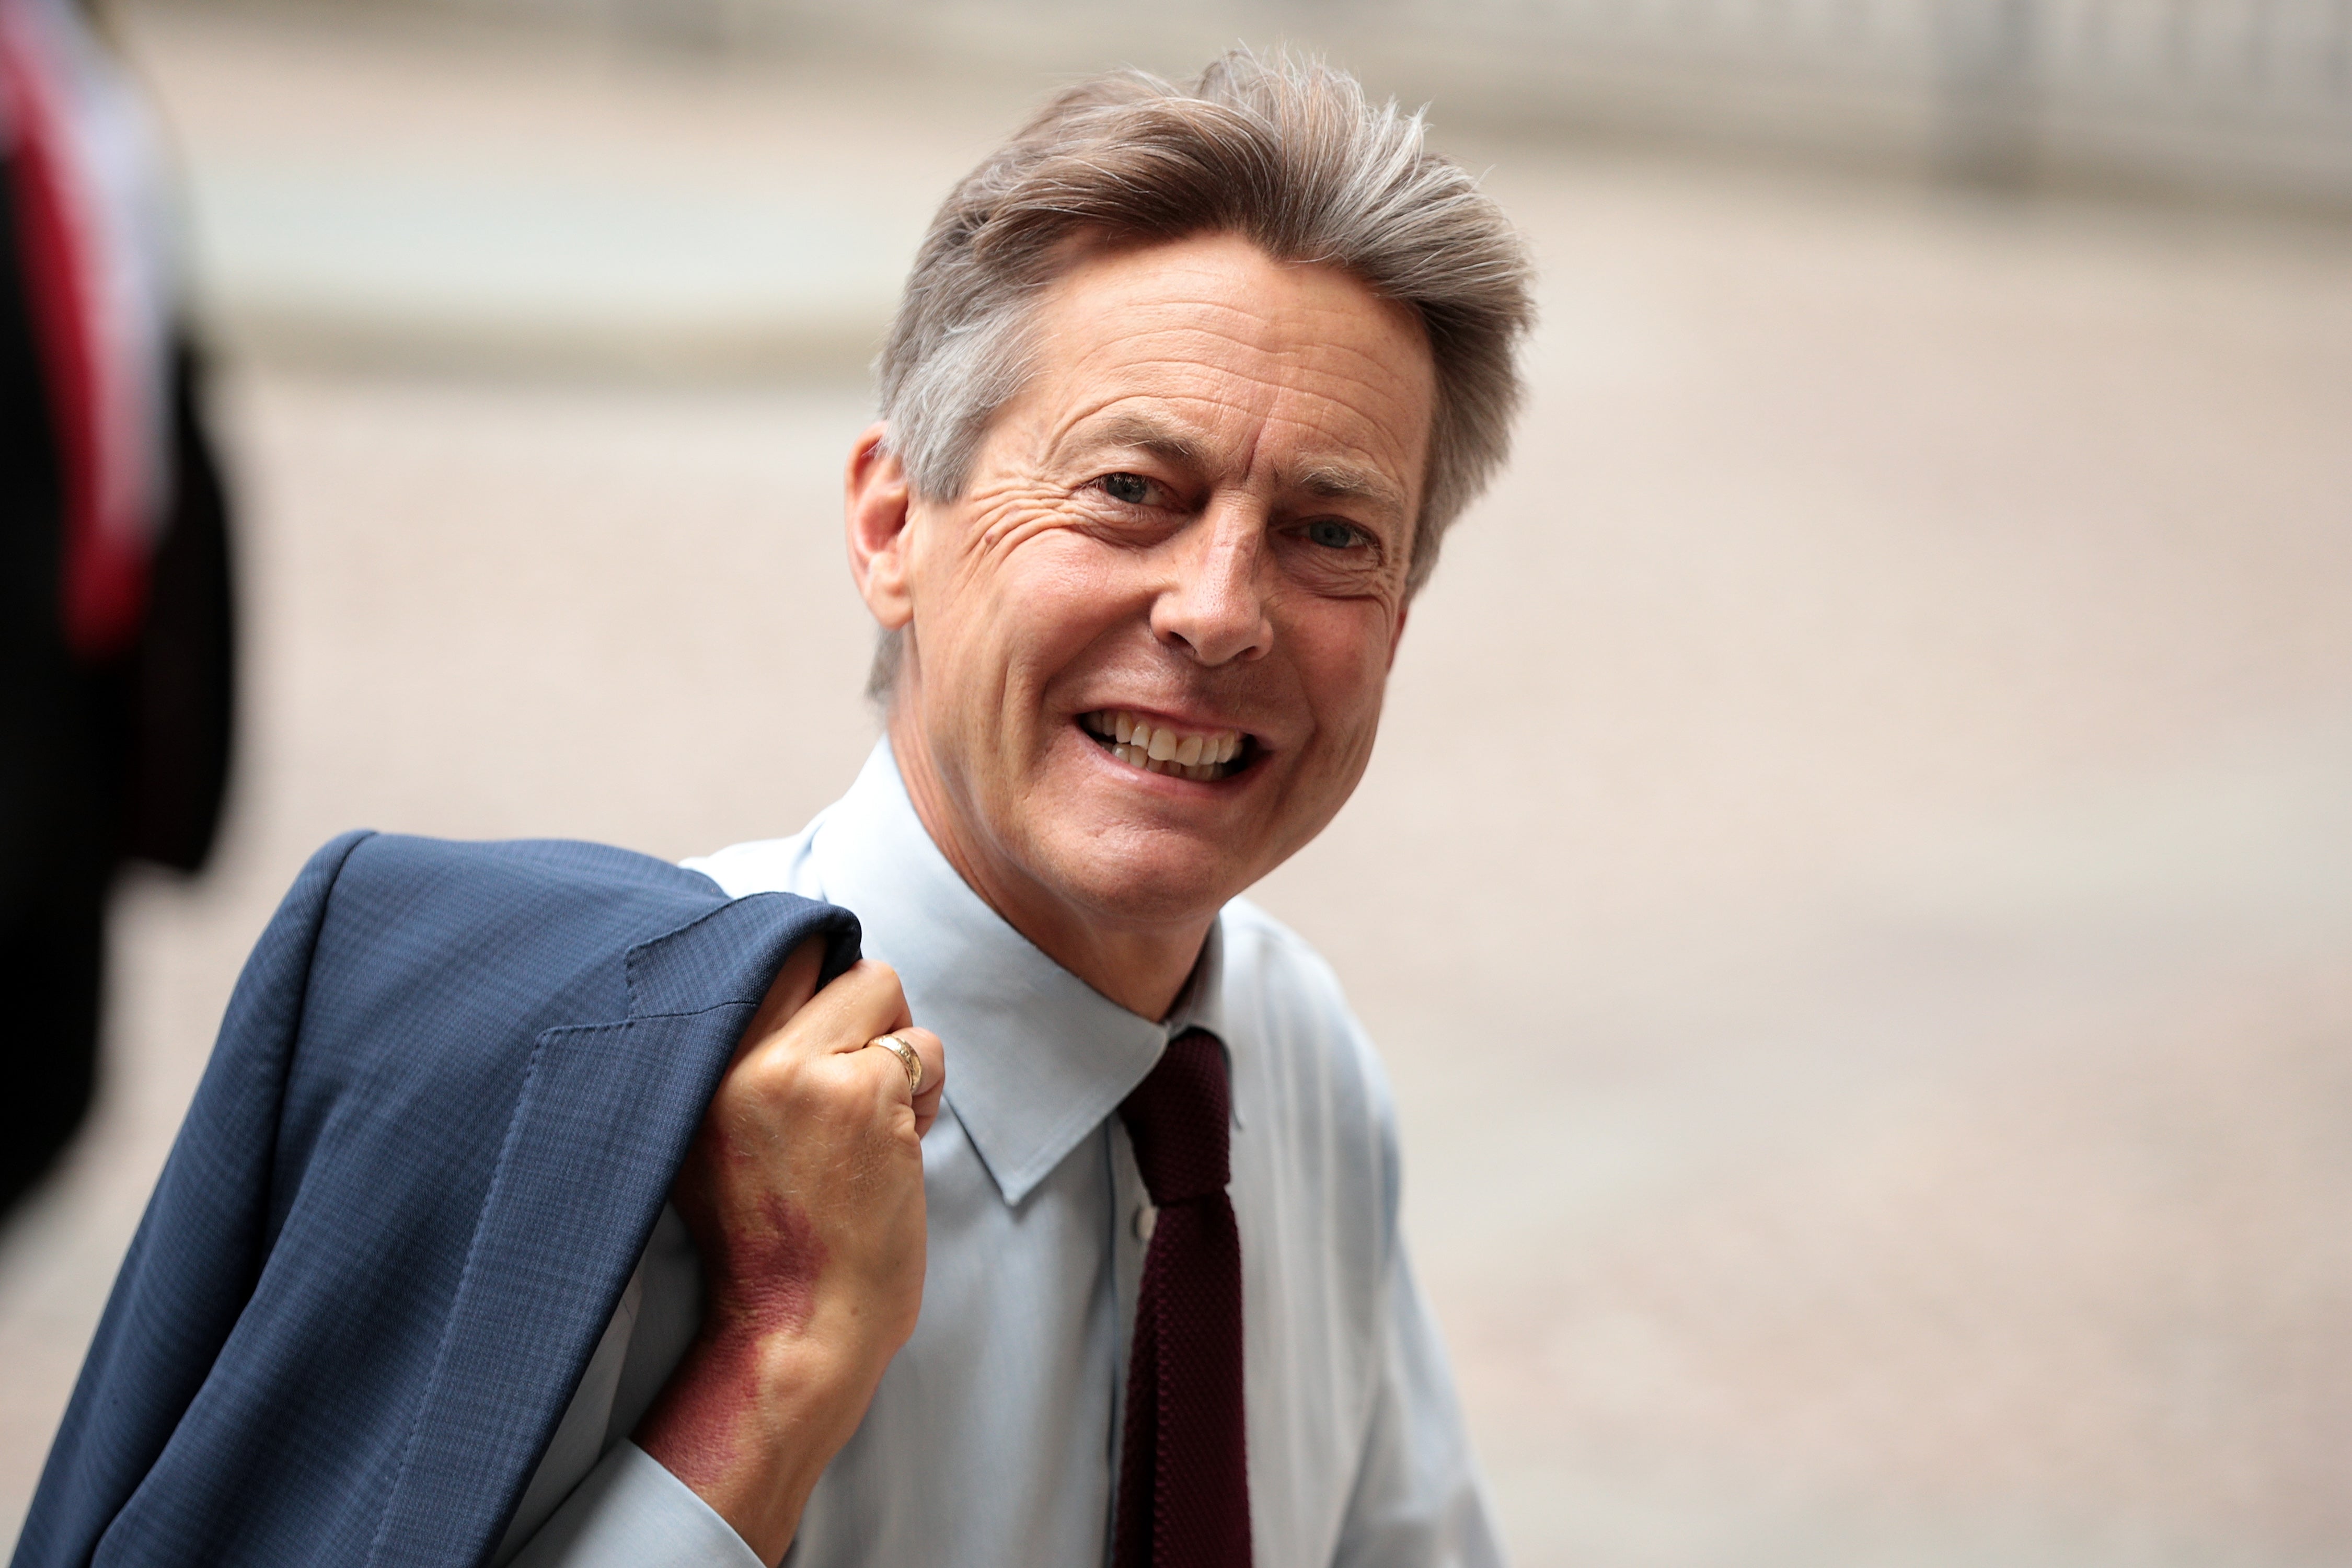 Sir Ben Bradshaw was health minister from 2007 to 2009